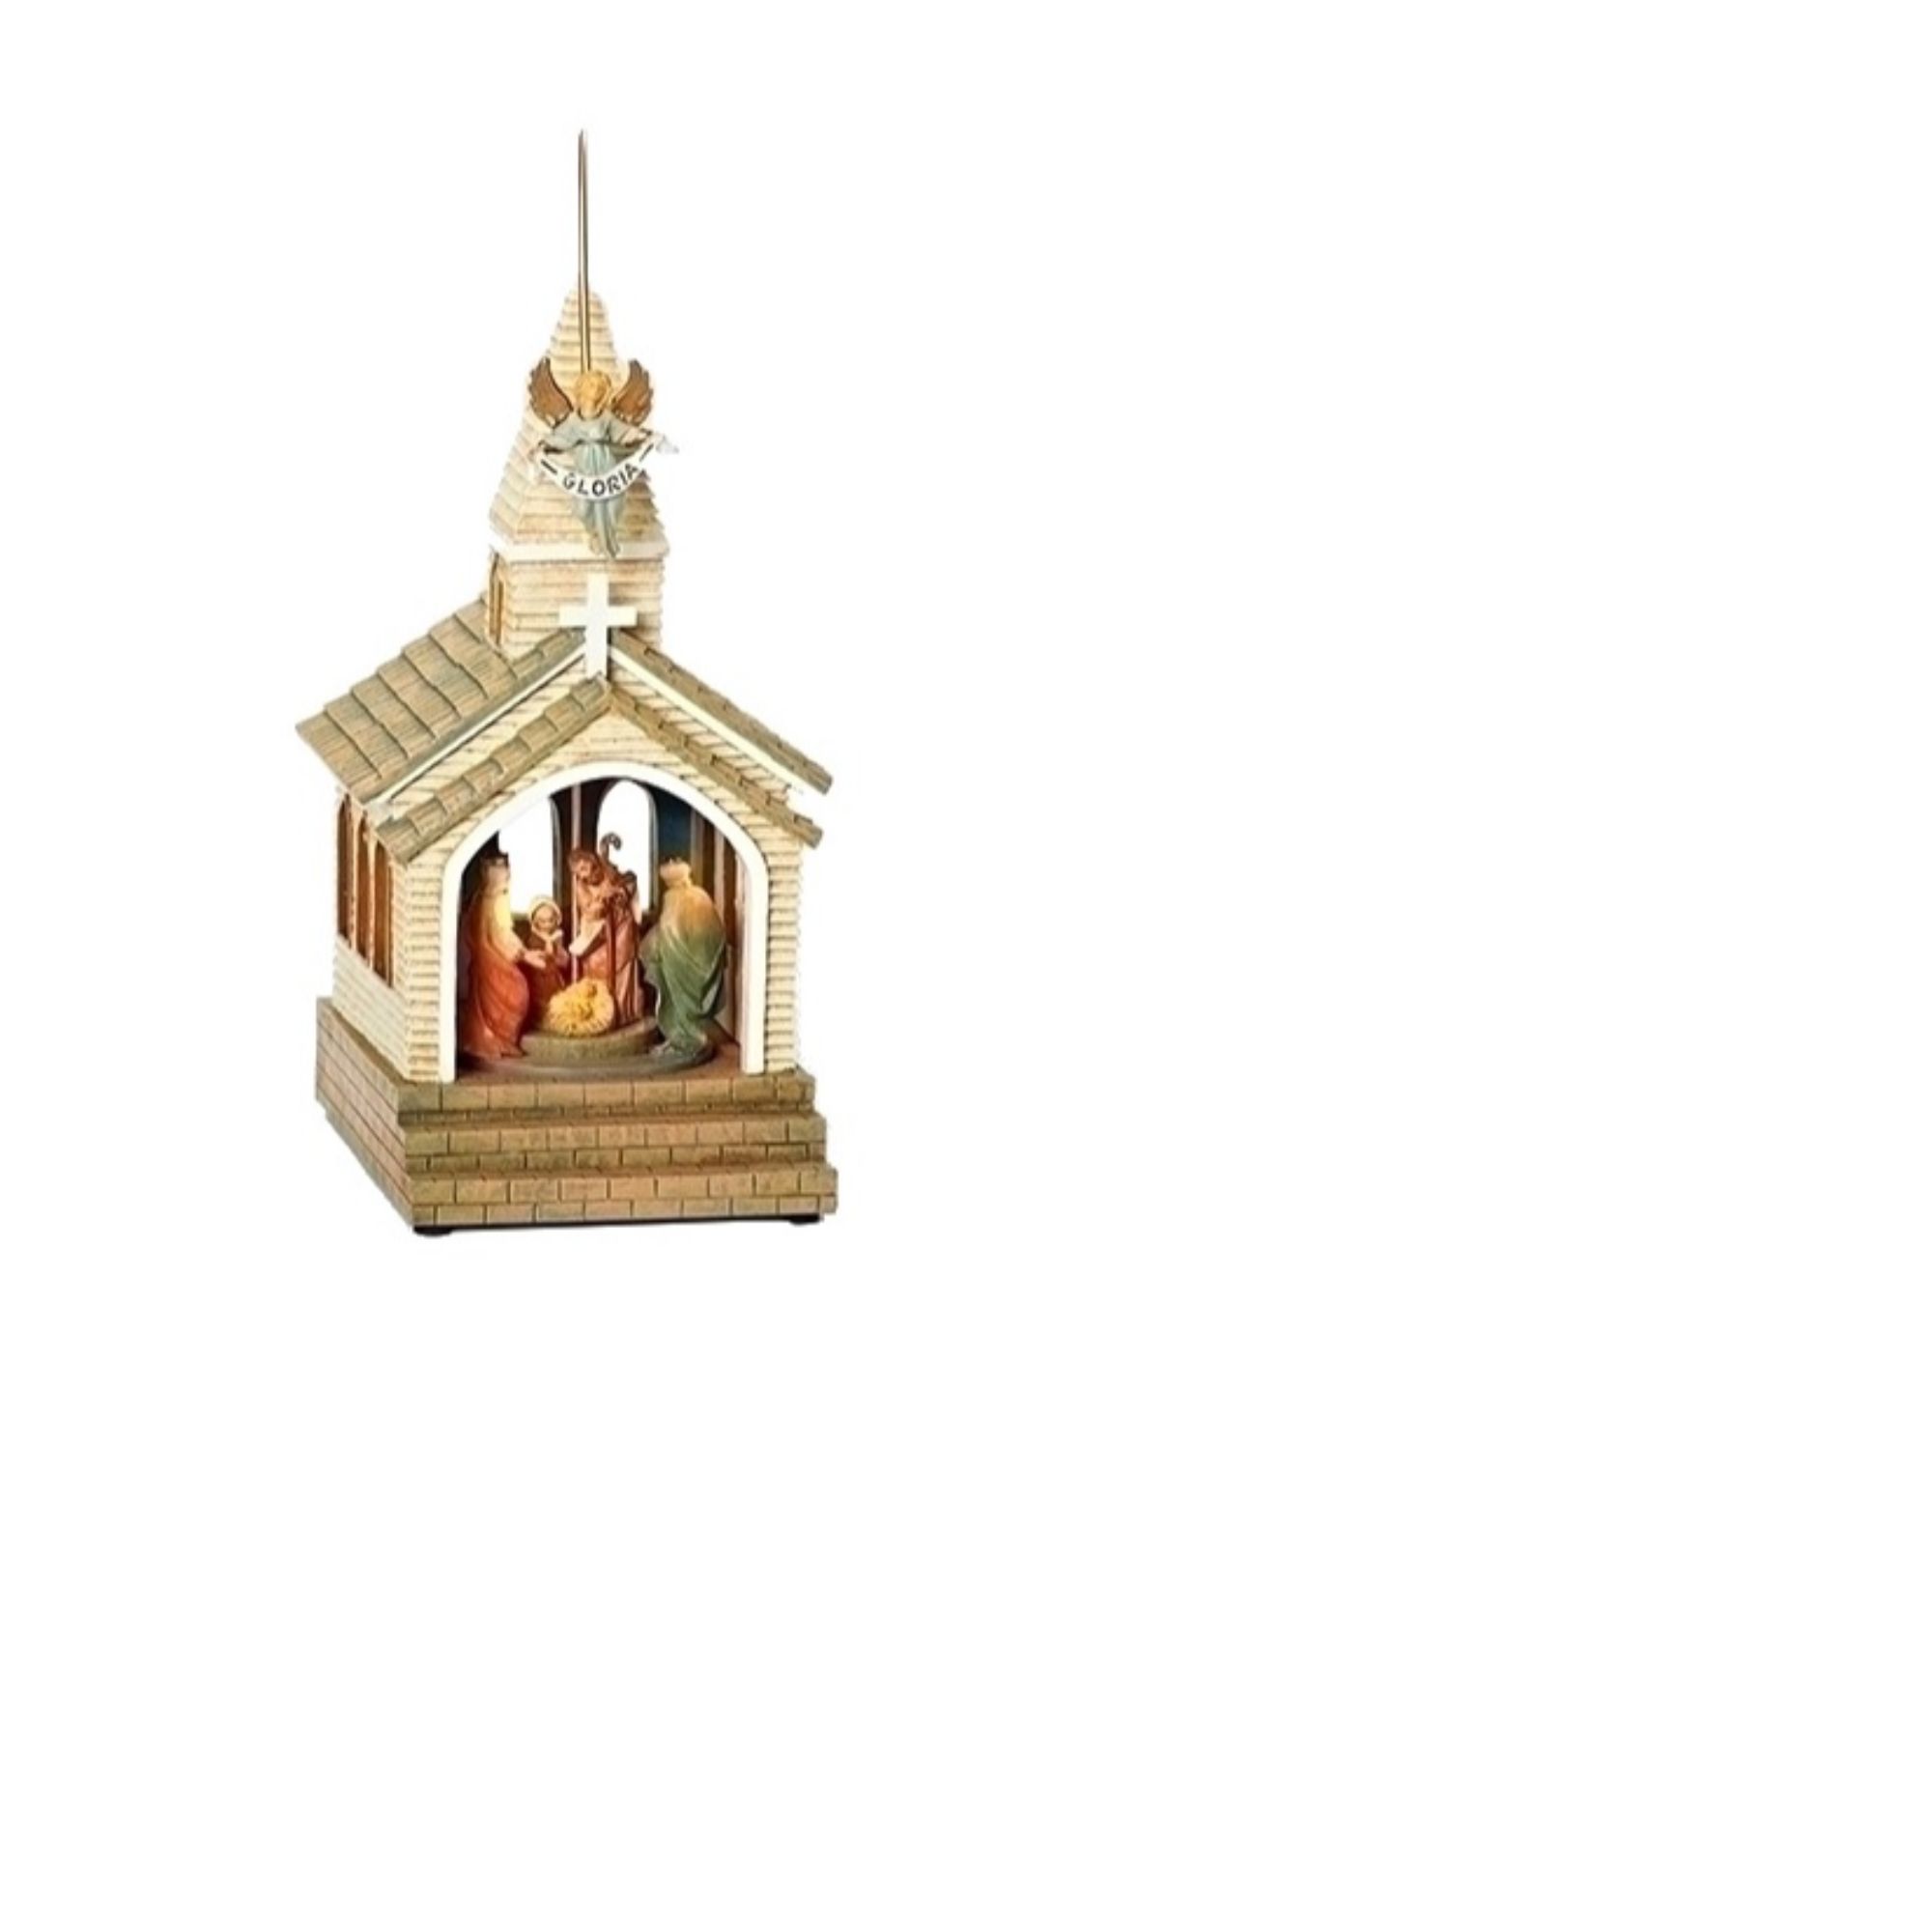 Roman 12" Brown and Red LED Lighted Musical Nativity Scene Christmas Ornament